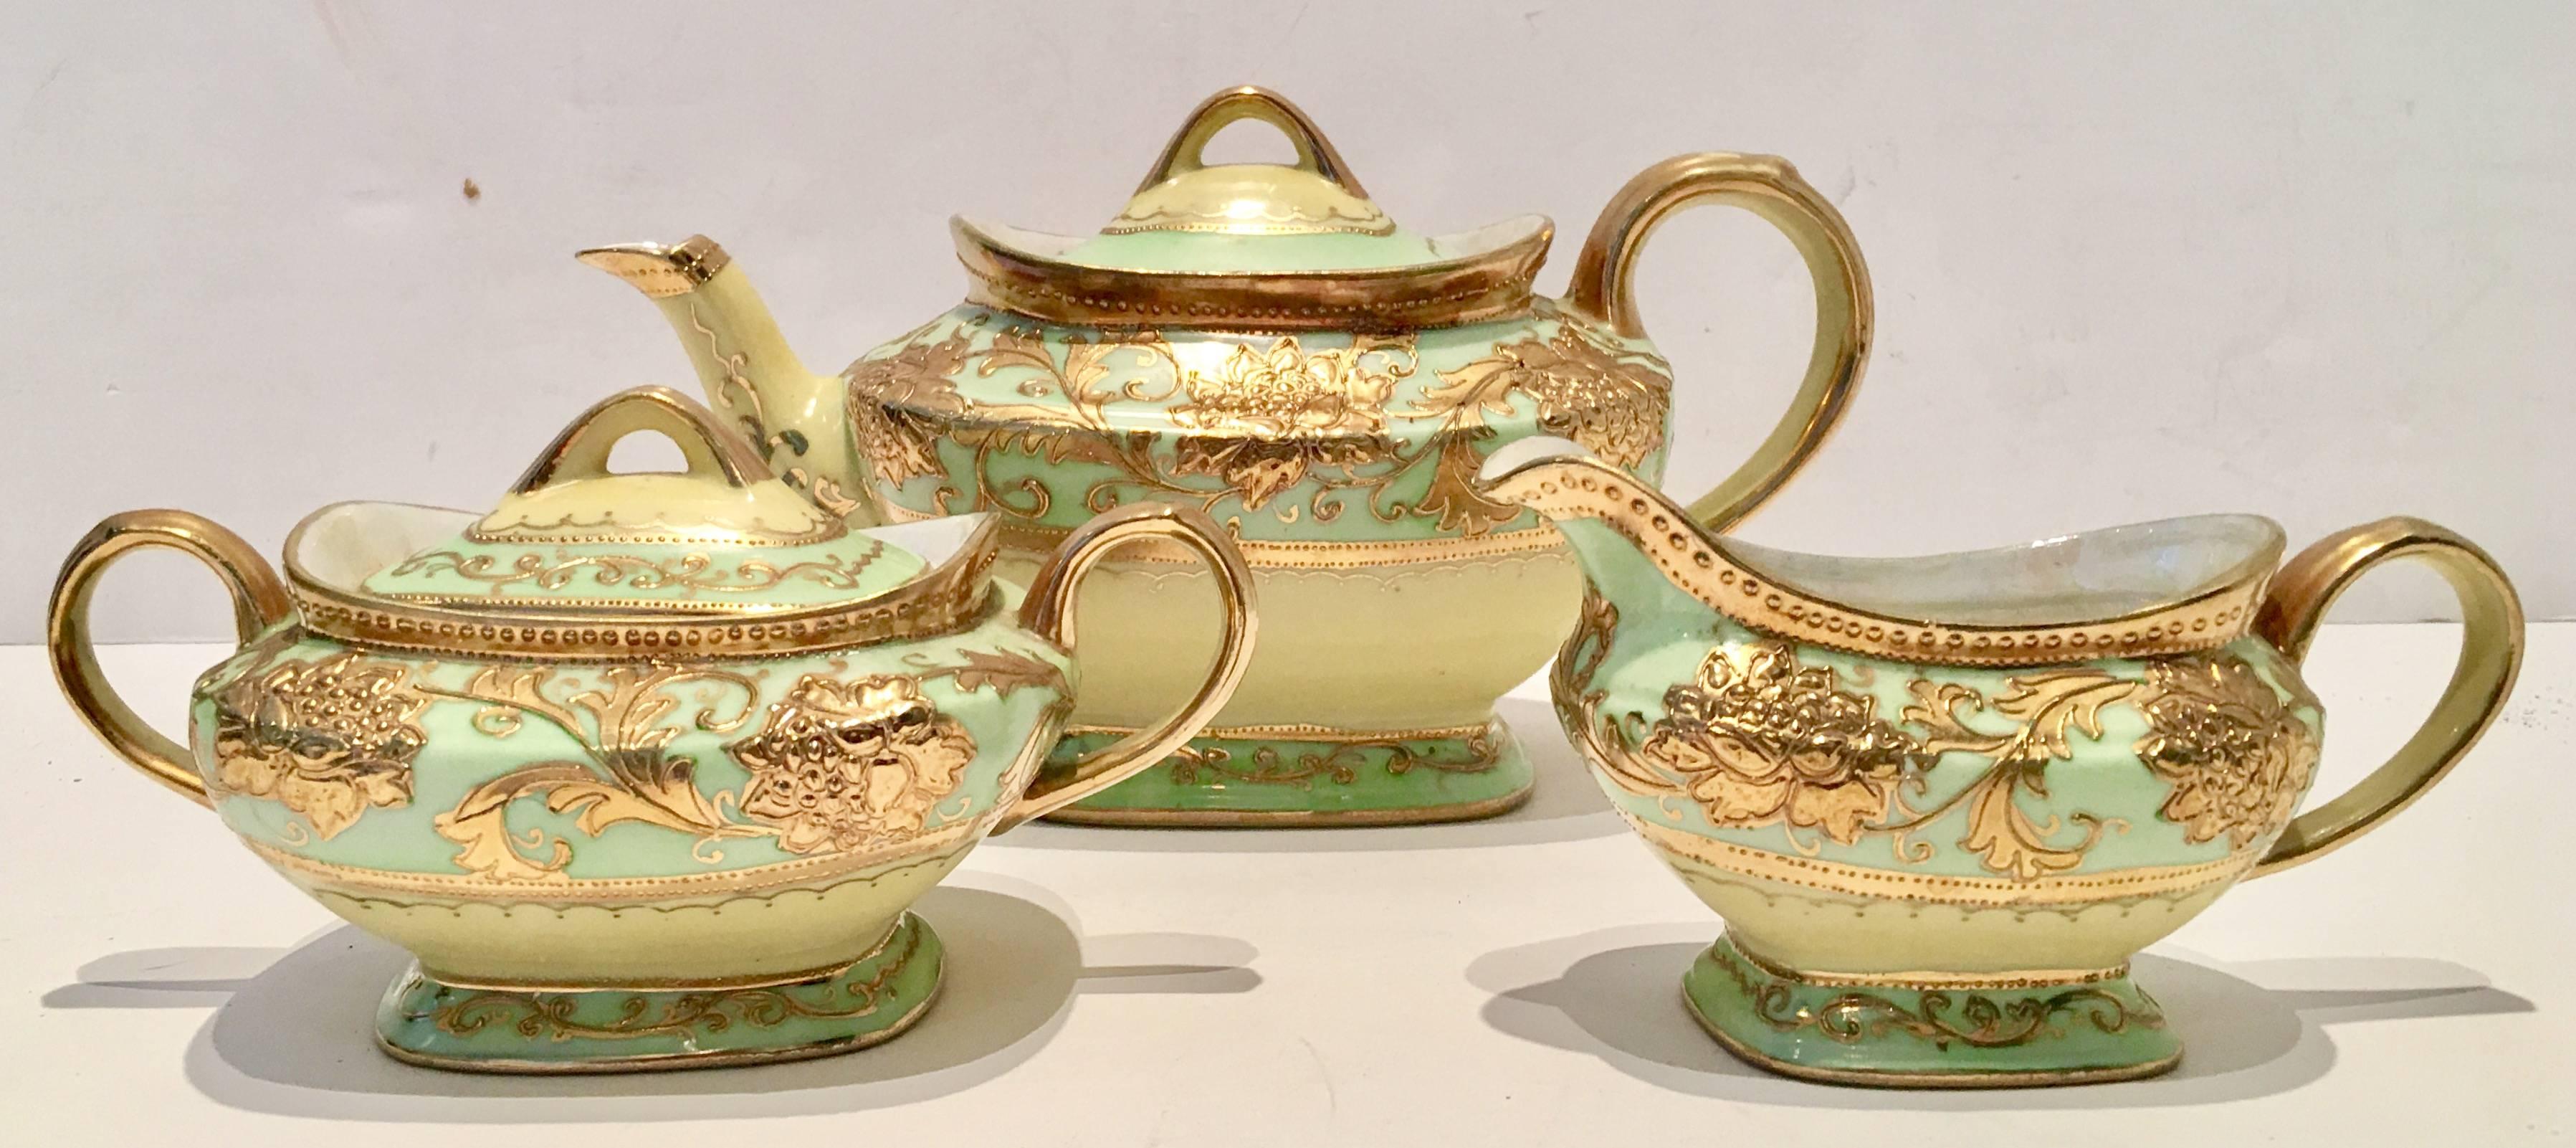 Stunning hand-painted porcelain luster ware raised 22-karat gold with pistachio green and butter yellow partial tea set. This 18 piece set includes, tea or coffee pot with lid, sugar bowl with lid, creamer, three dessert plates, six tea cups and